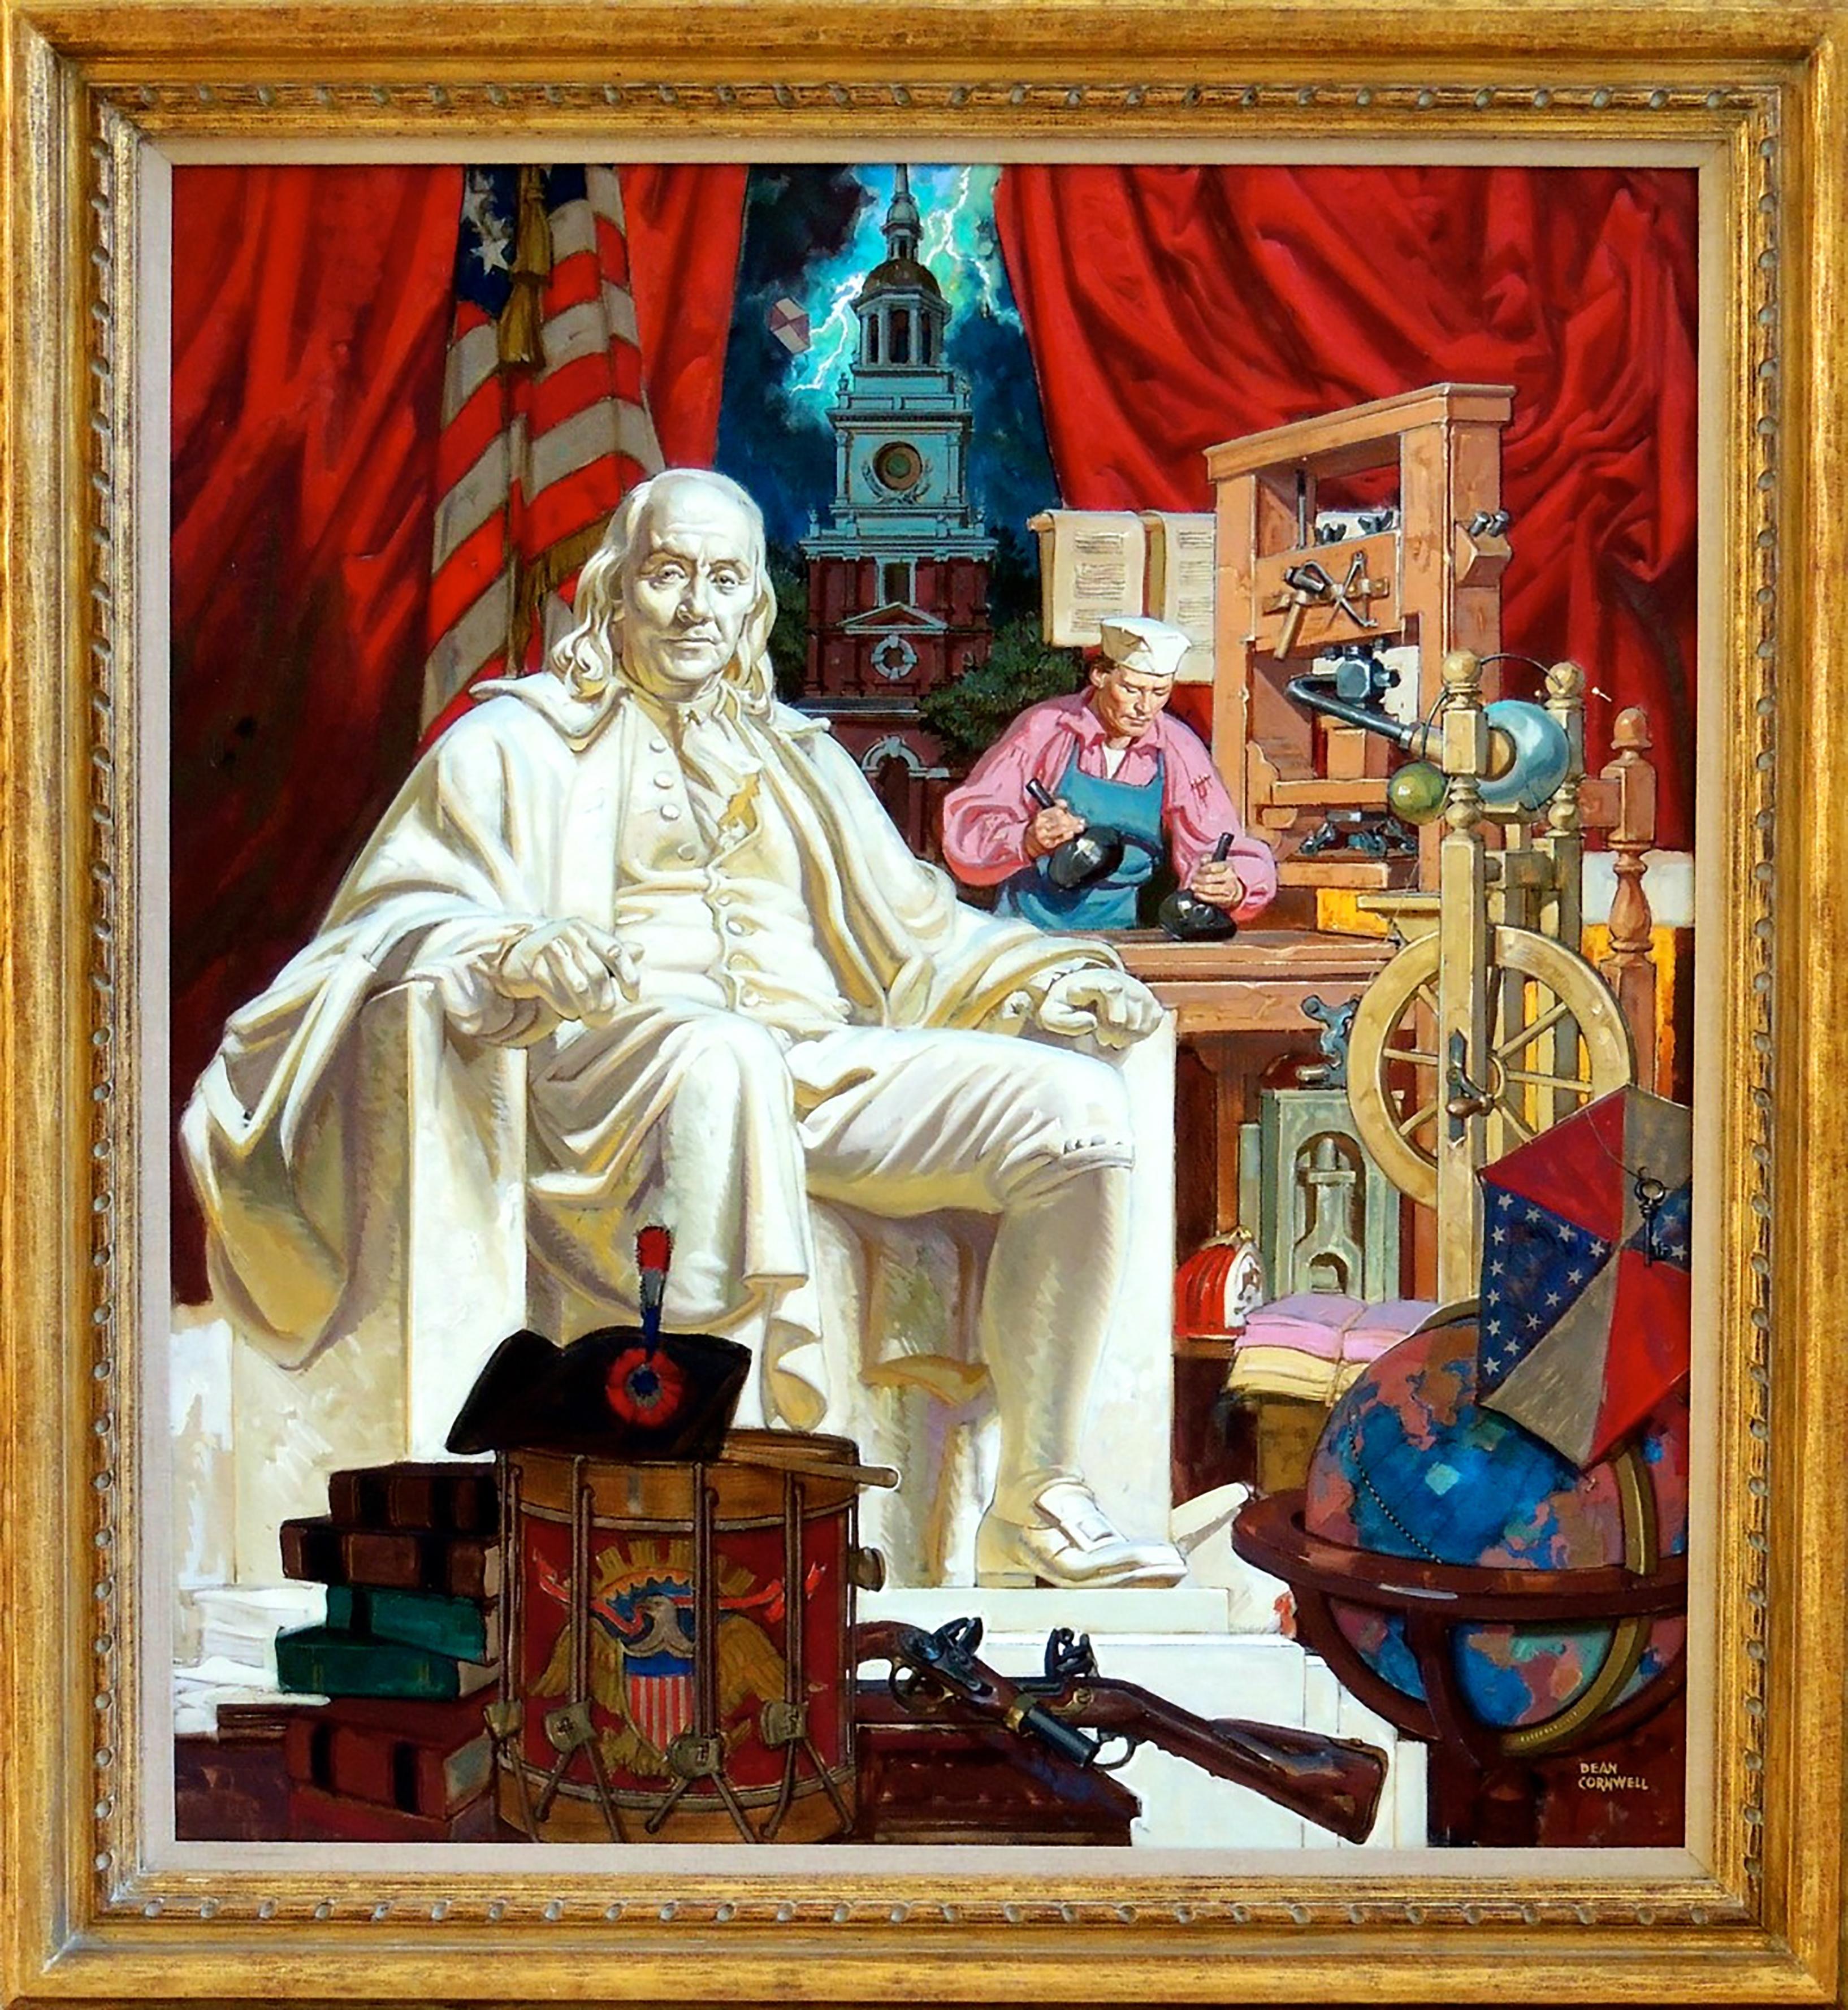 Ben Franklin - Painting by Dean Cornwell